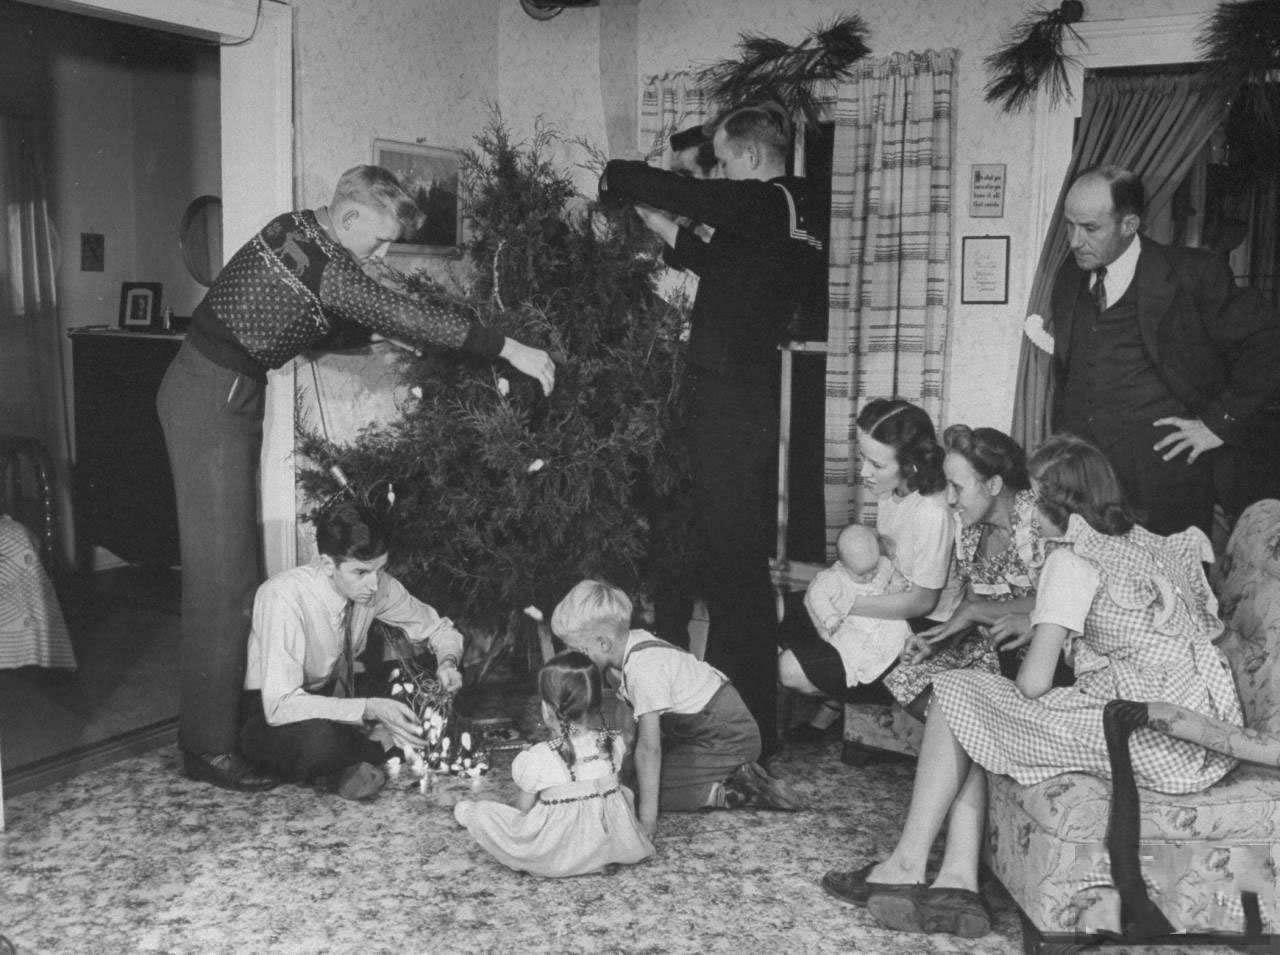 Members of farmer James Ferdinand Irwin's family trimming native cedar Christmas tree in living room during family reunion and early Christmas celebration marking the return of Irwin's sons and sons-in-law from service in WWII.